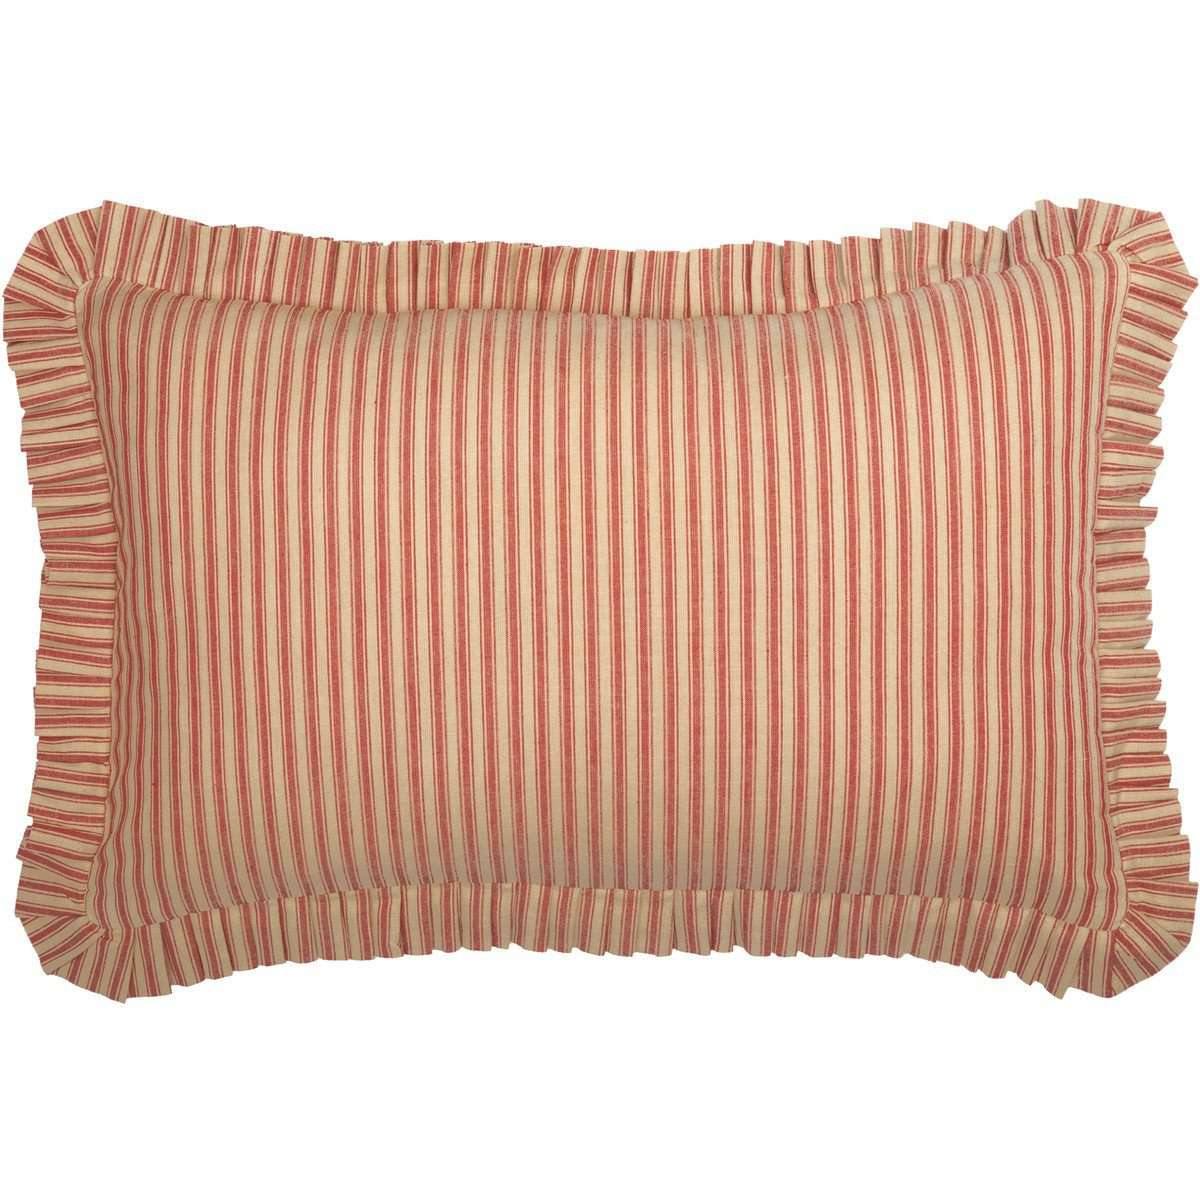 Rory Schoolhouse Red Ticking Stripe Fabric Pillow 14x22 VHC Brands front